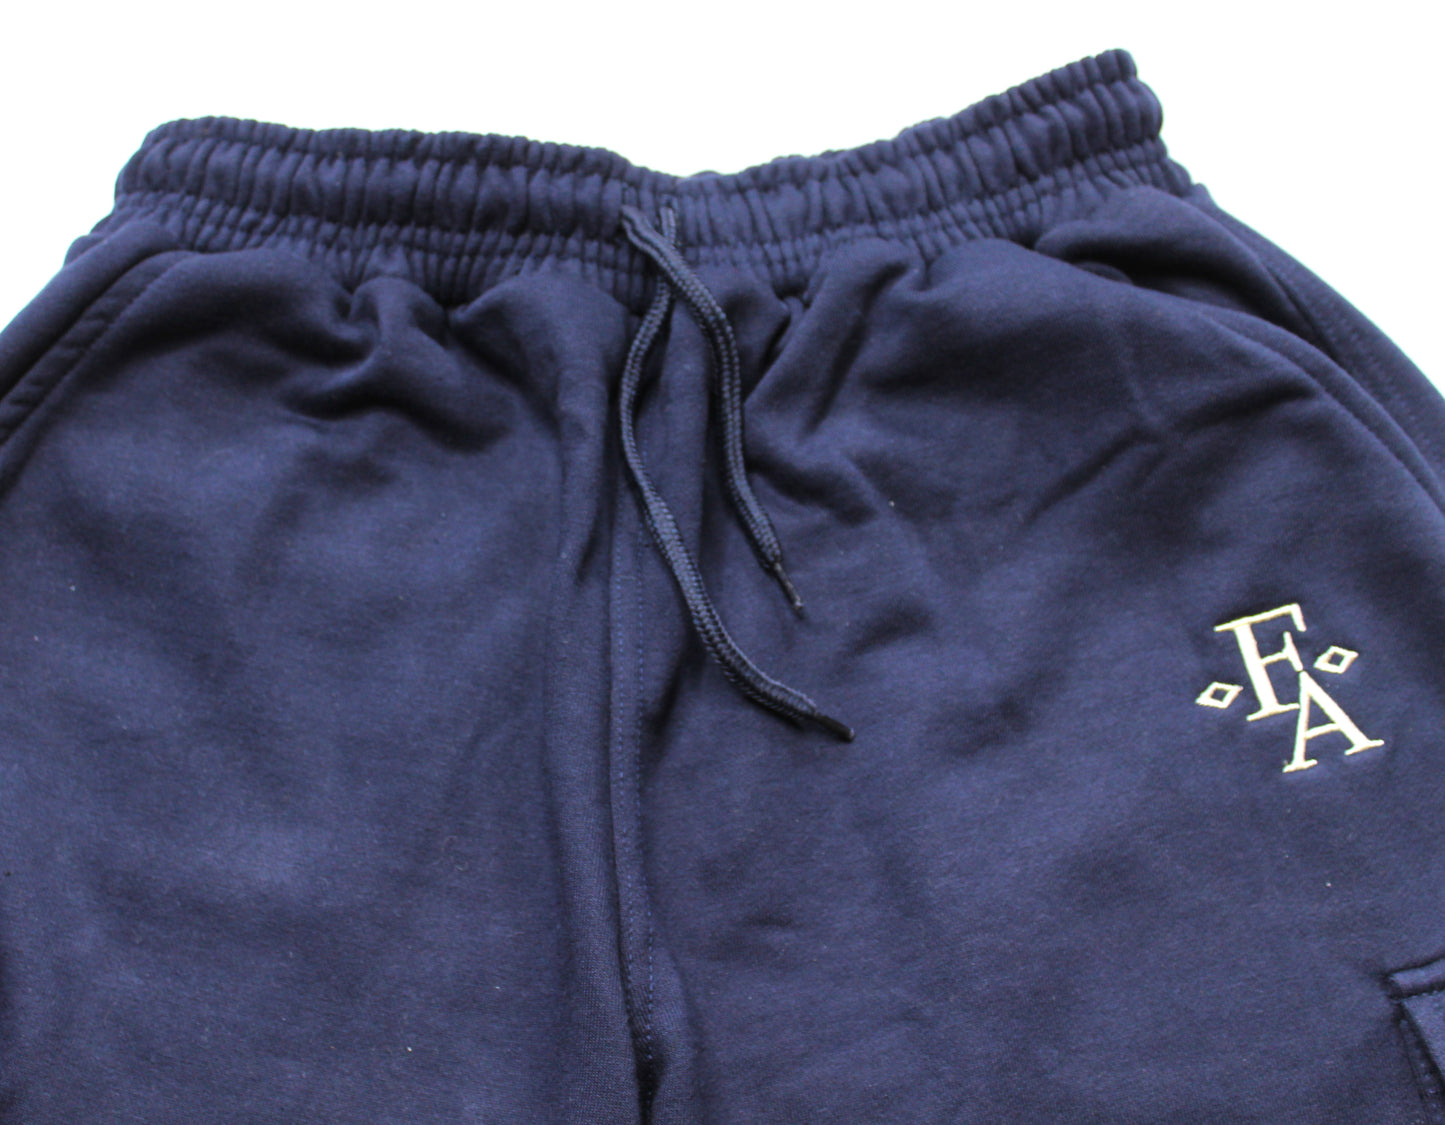 Classic Fit Navy Cotton Fleece Embroidered Cargo Shorts